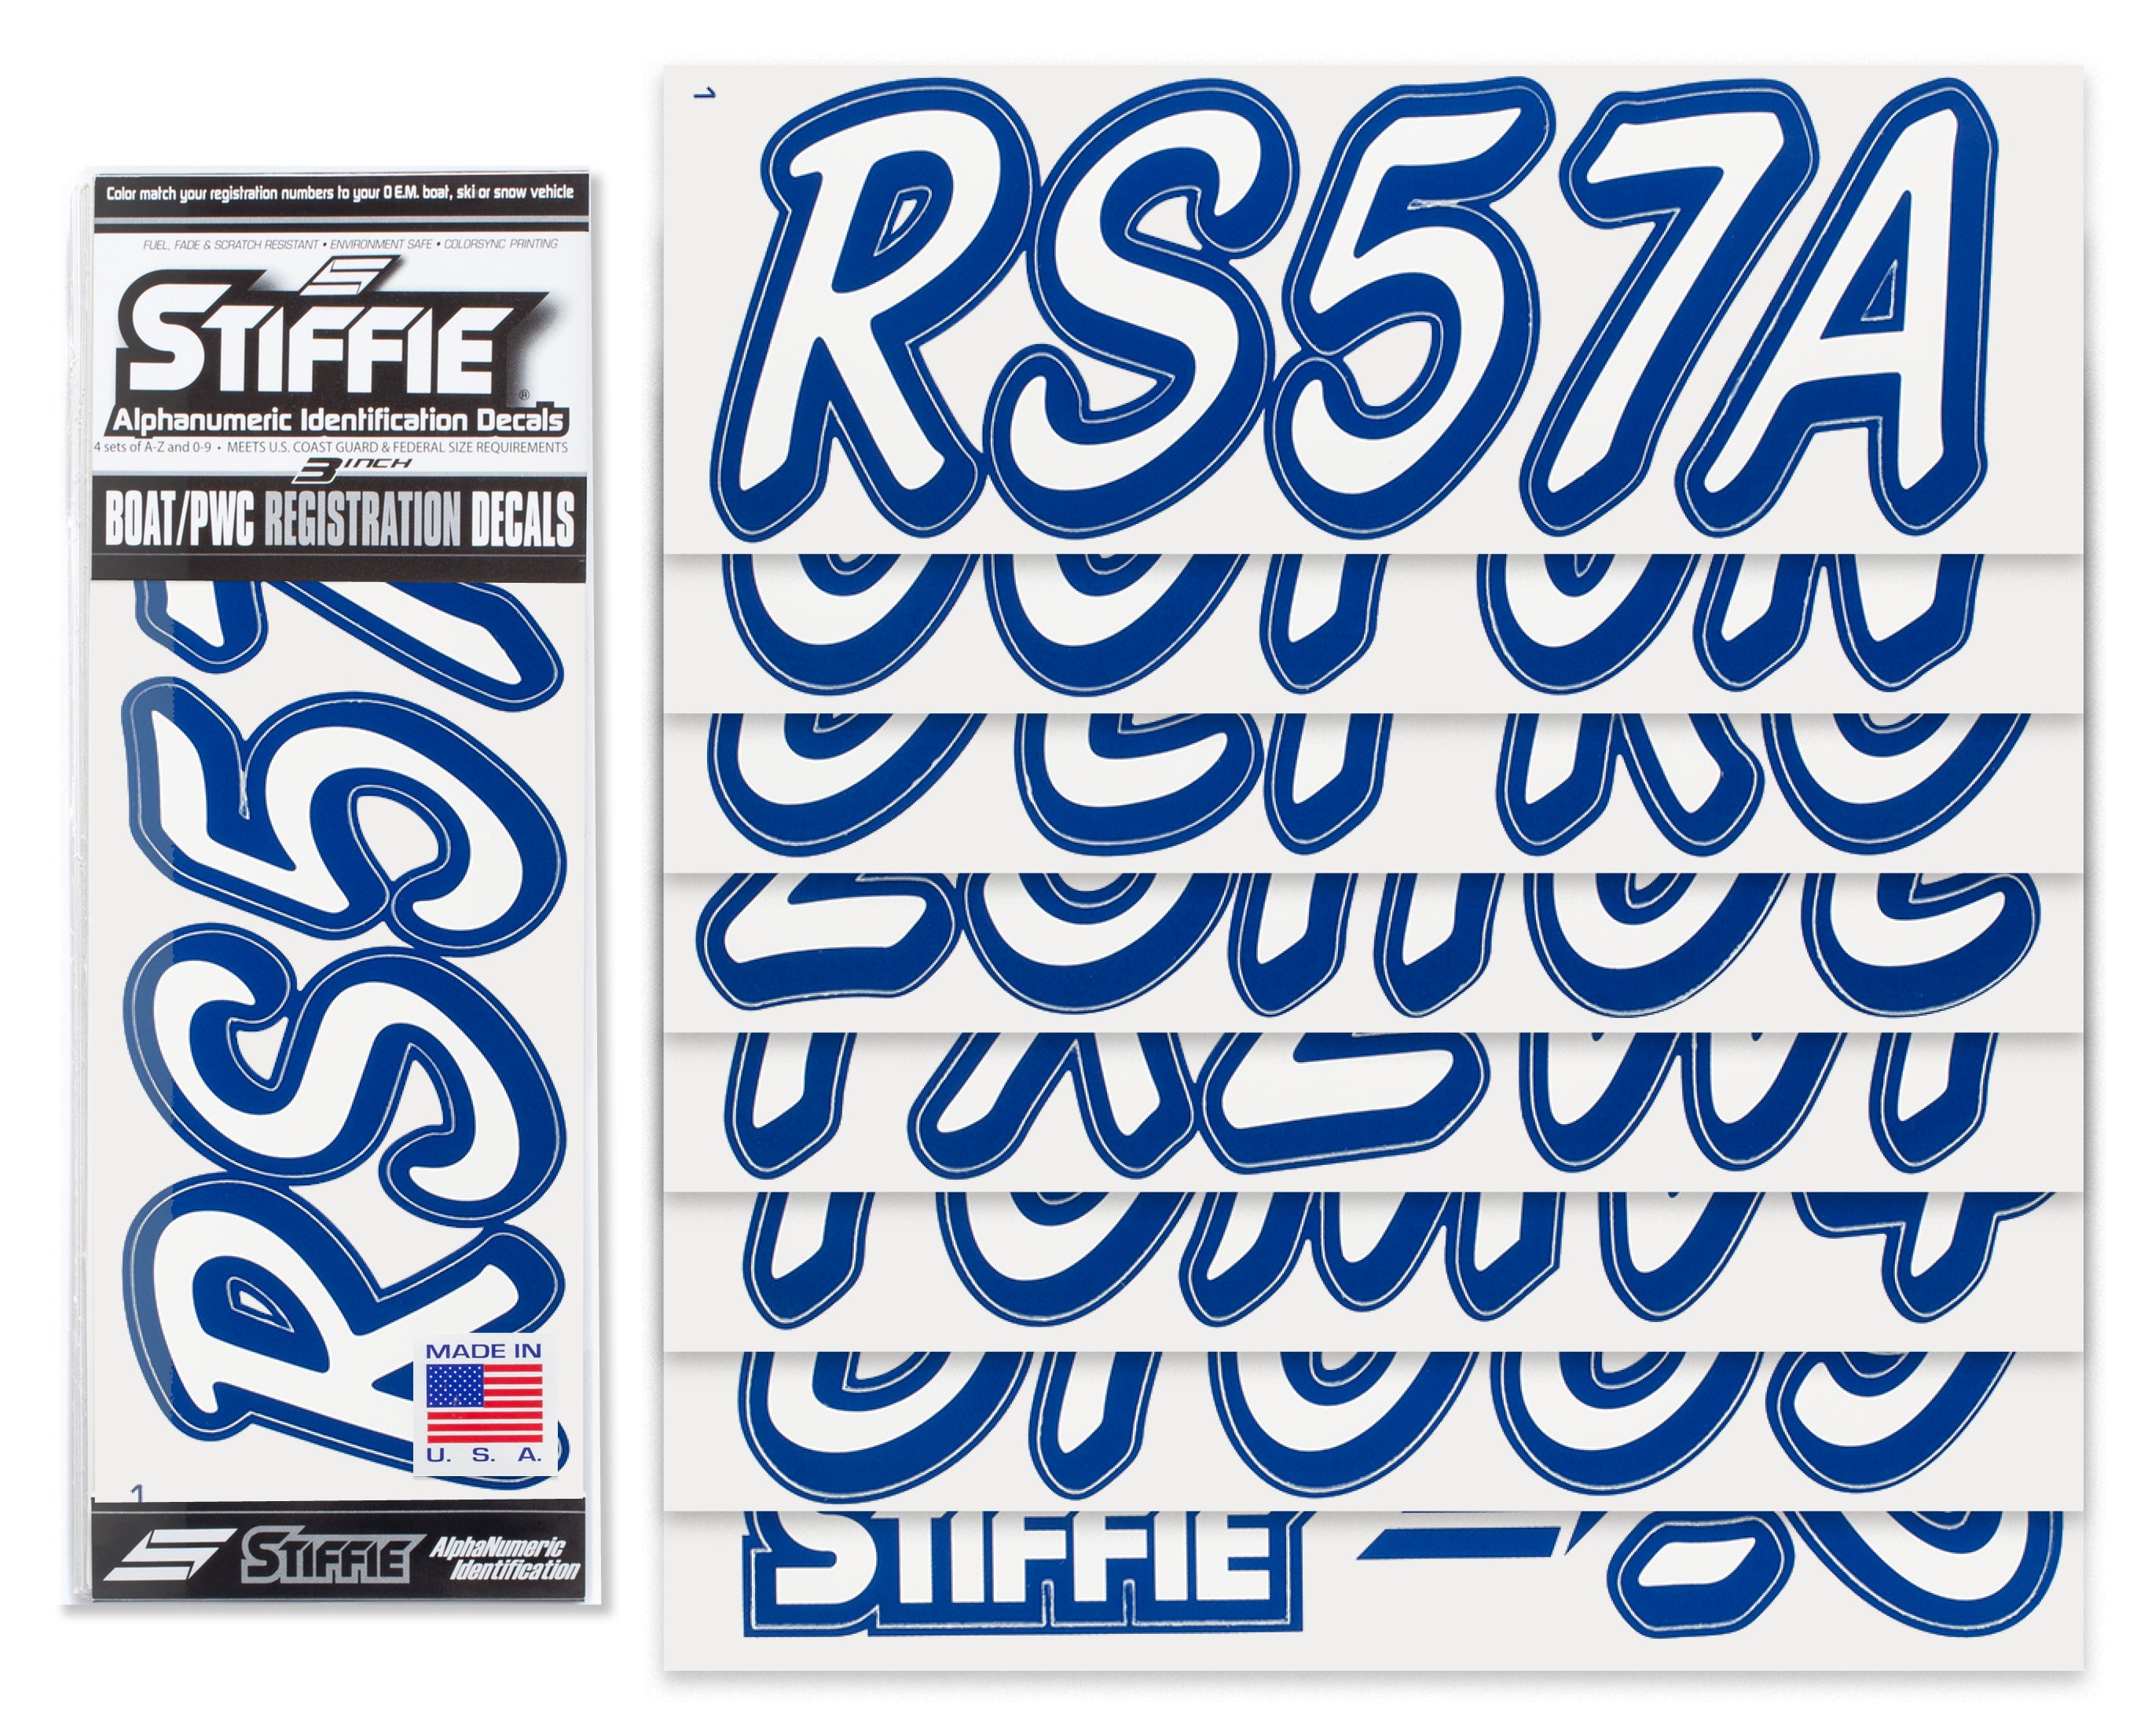 STIFFIE Whipline Solid White/Navy 3" Alpha-Numeric Registration Identification Numbers Stickers Decals for Boats & Personal Watercraft